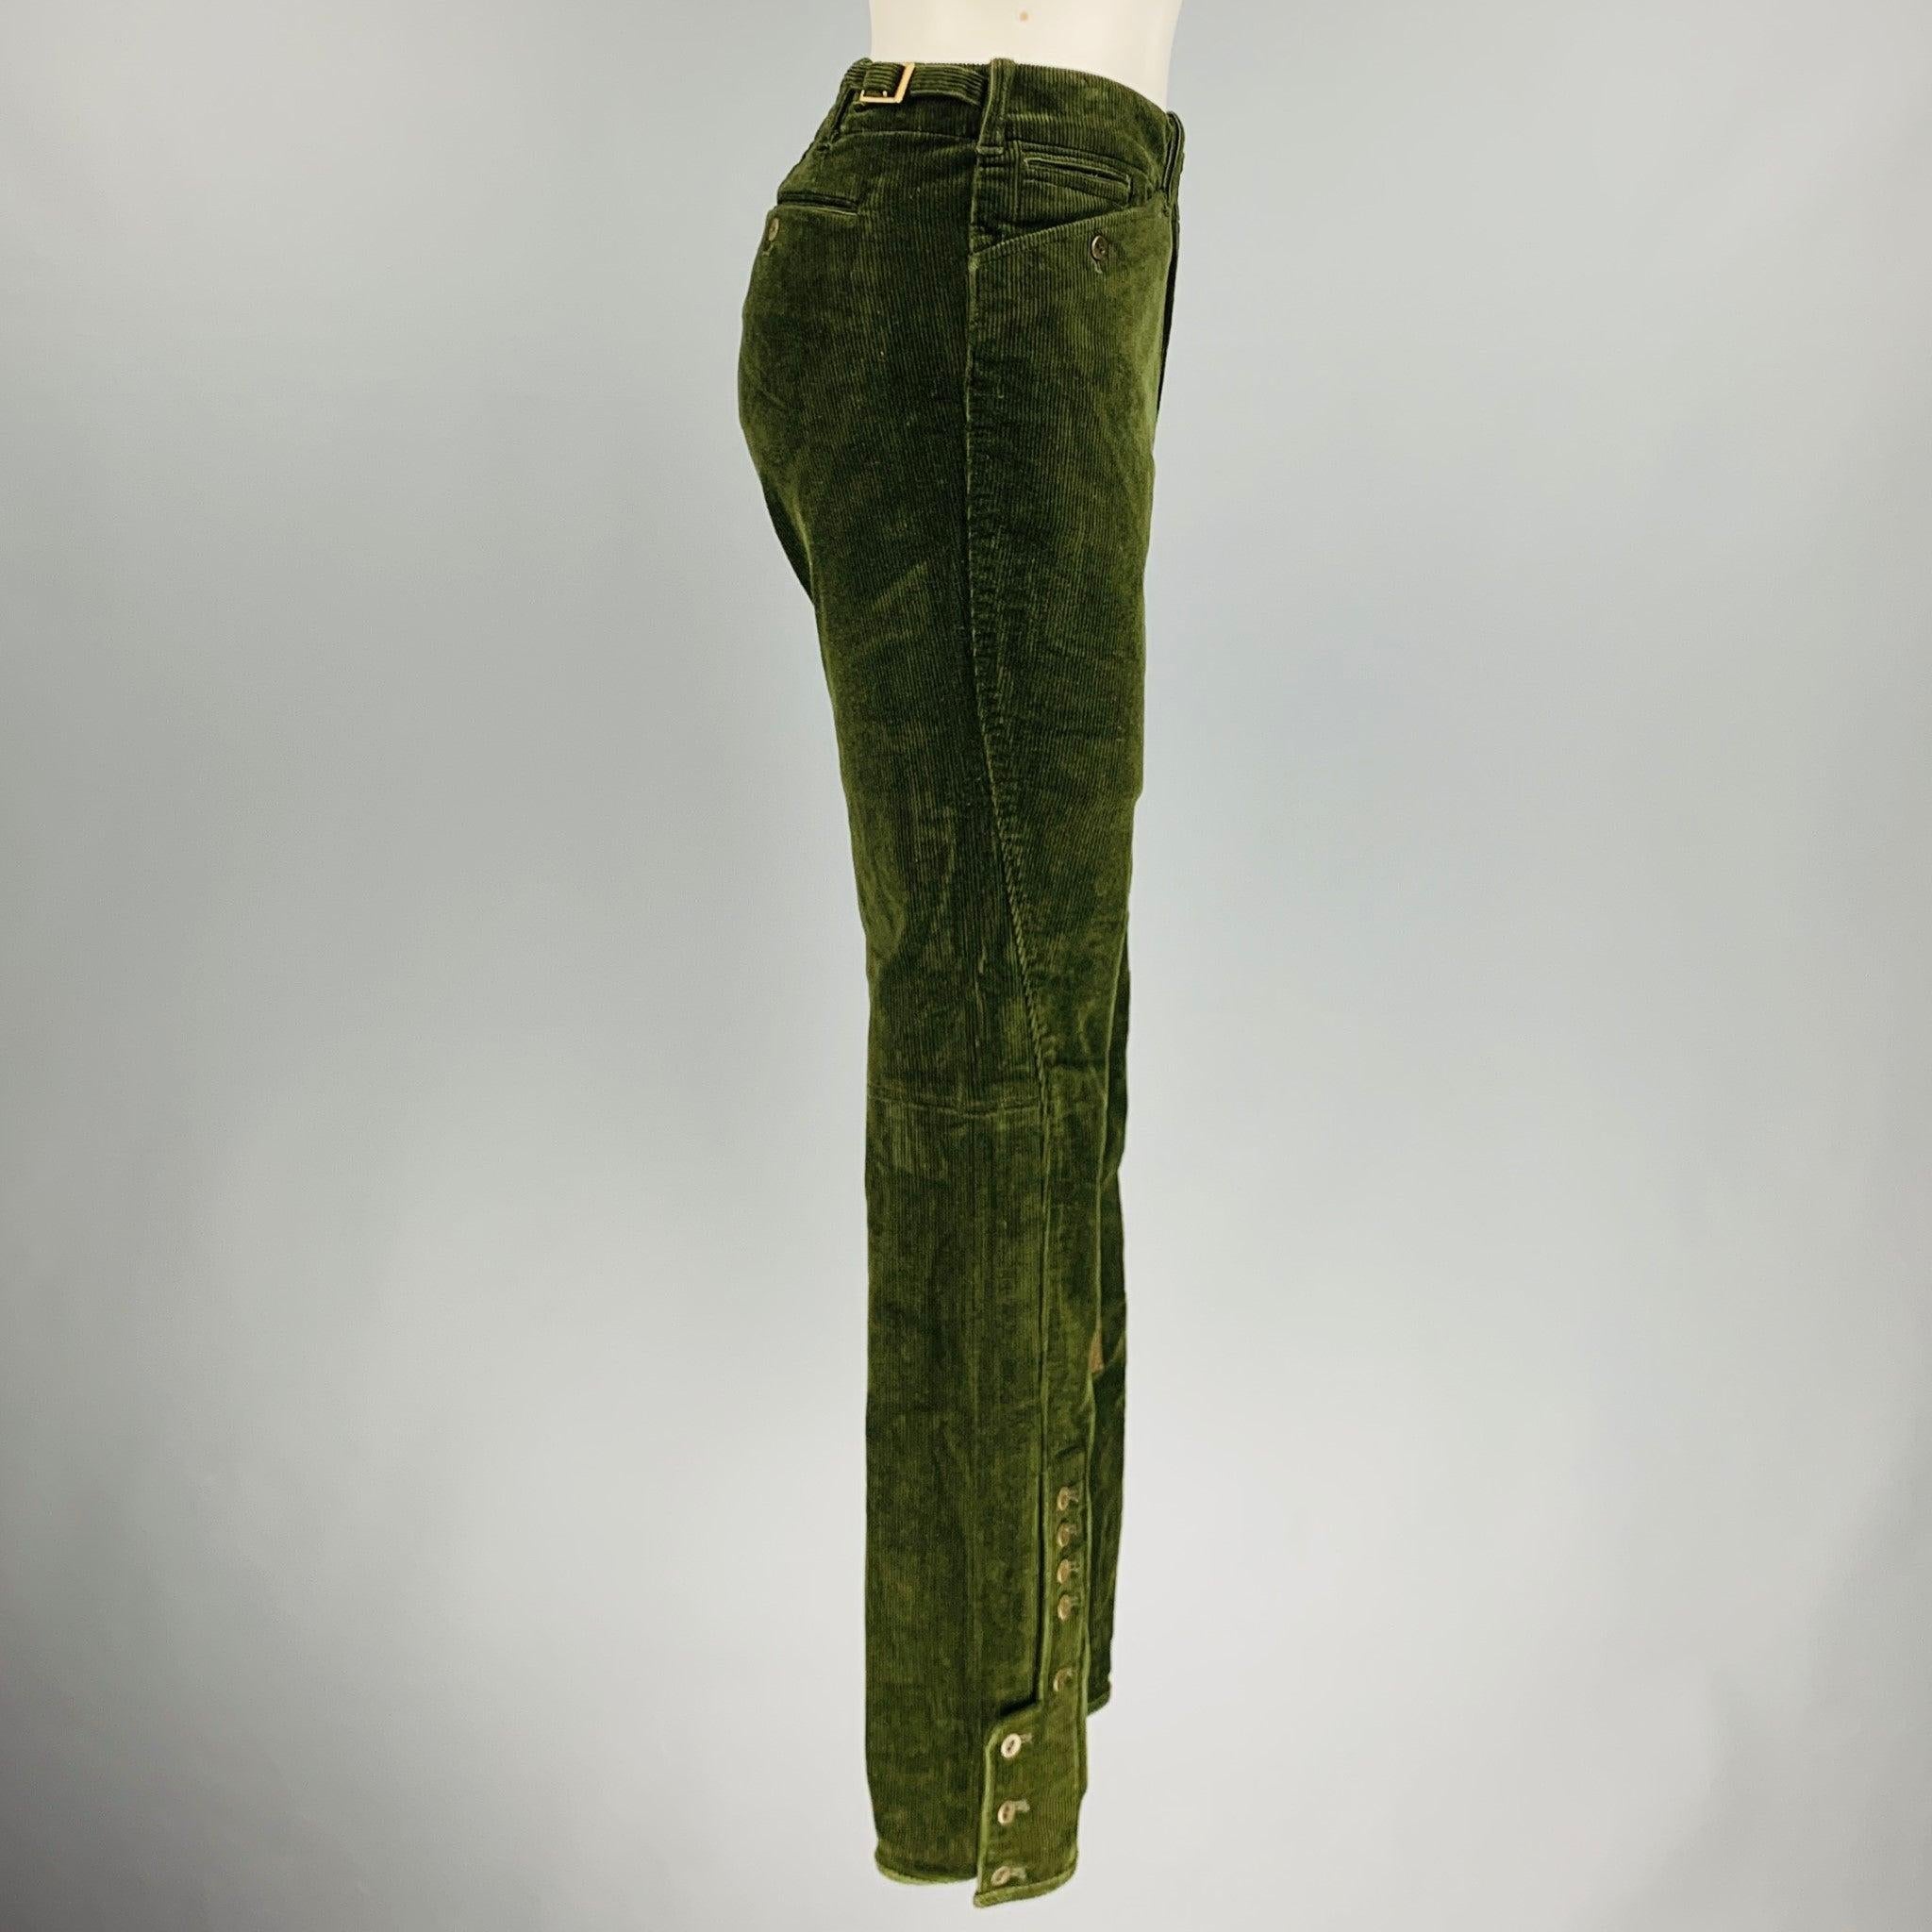 RALPH LAUREN BLUE LABEL casual pants comes in a green olive cotton and elastane corduroy featuring a brown suede patch details, tab detail at waistband, regular fit, low rise, button details at bottom hem, and a zip fly closure.Excellent Pre-Owned